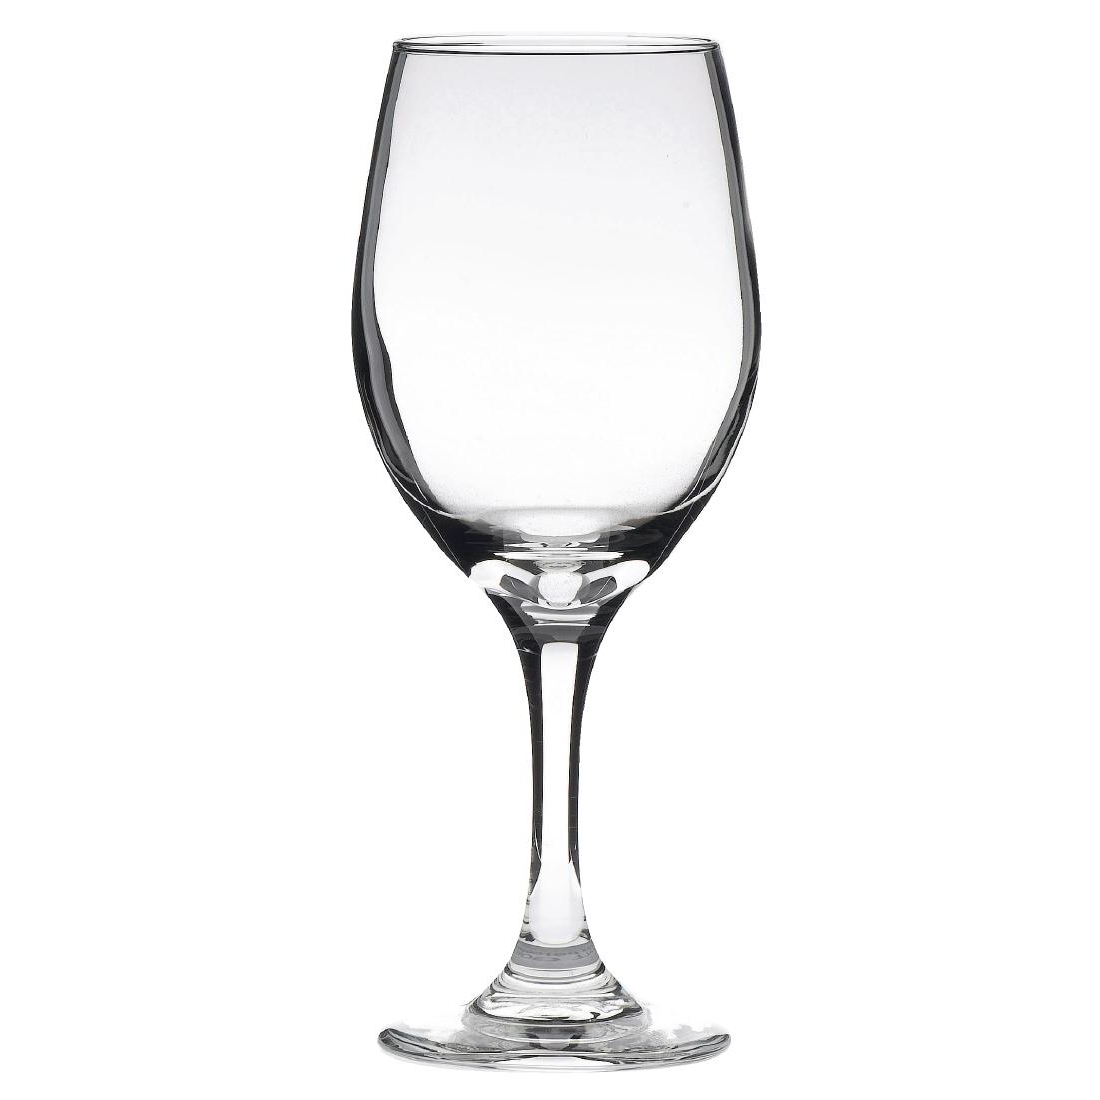 Libbey Perception Goblets 410ml CE Marked at 250ml